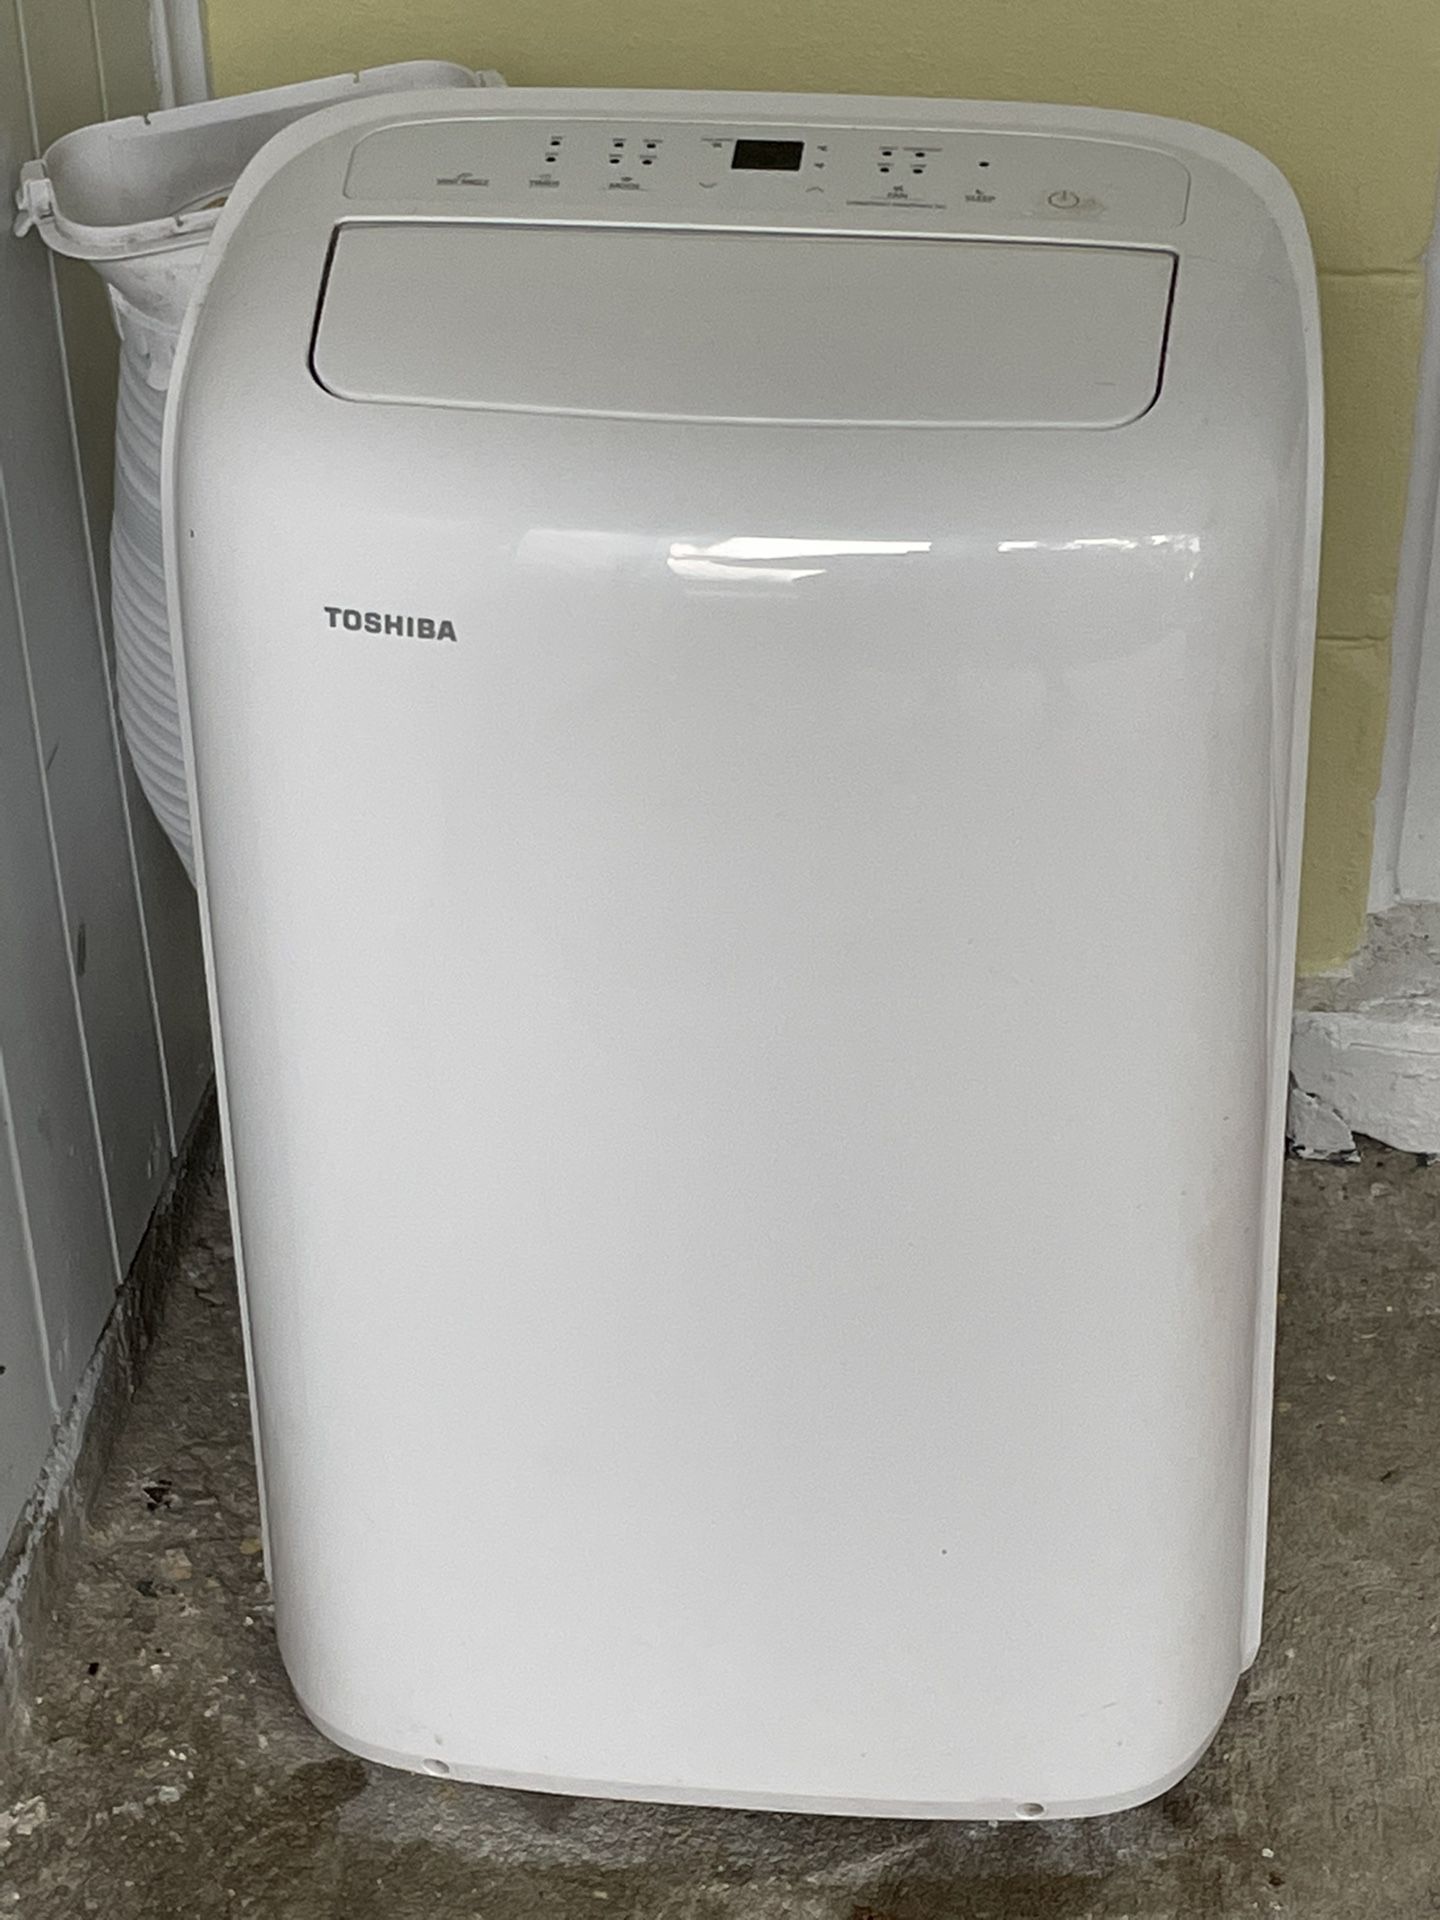 Toshiba Portable AC with Remote